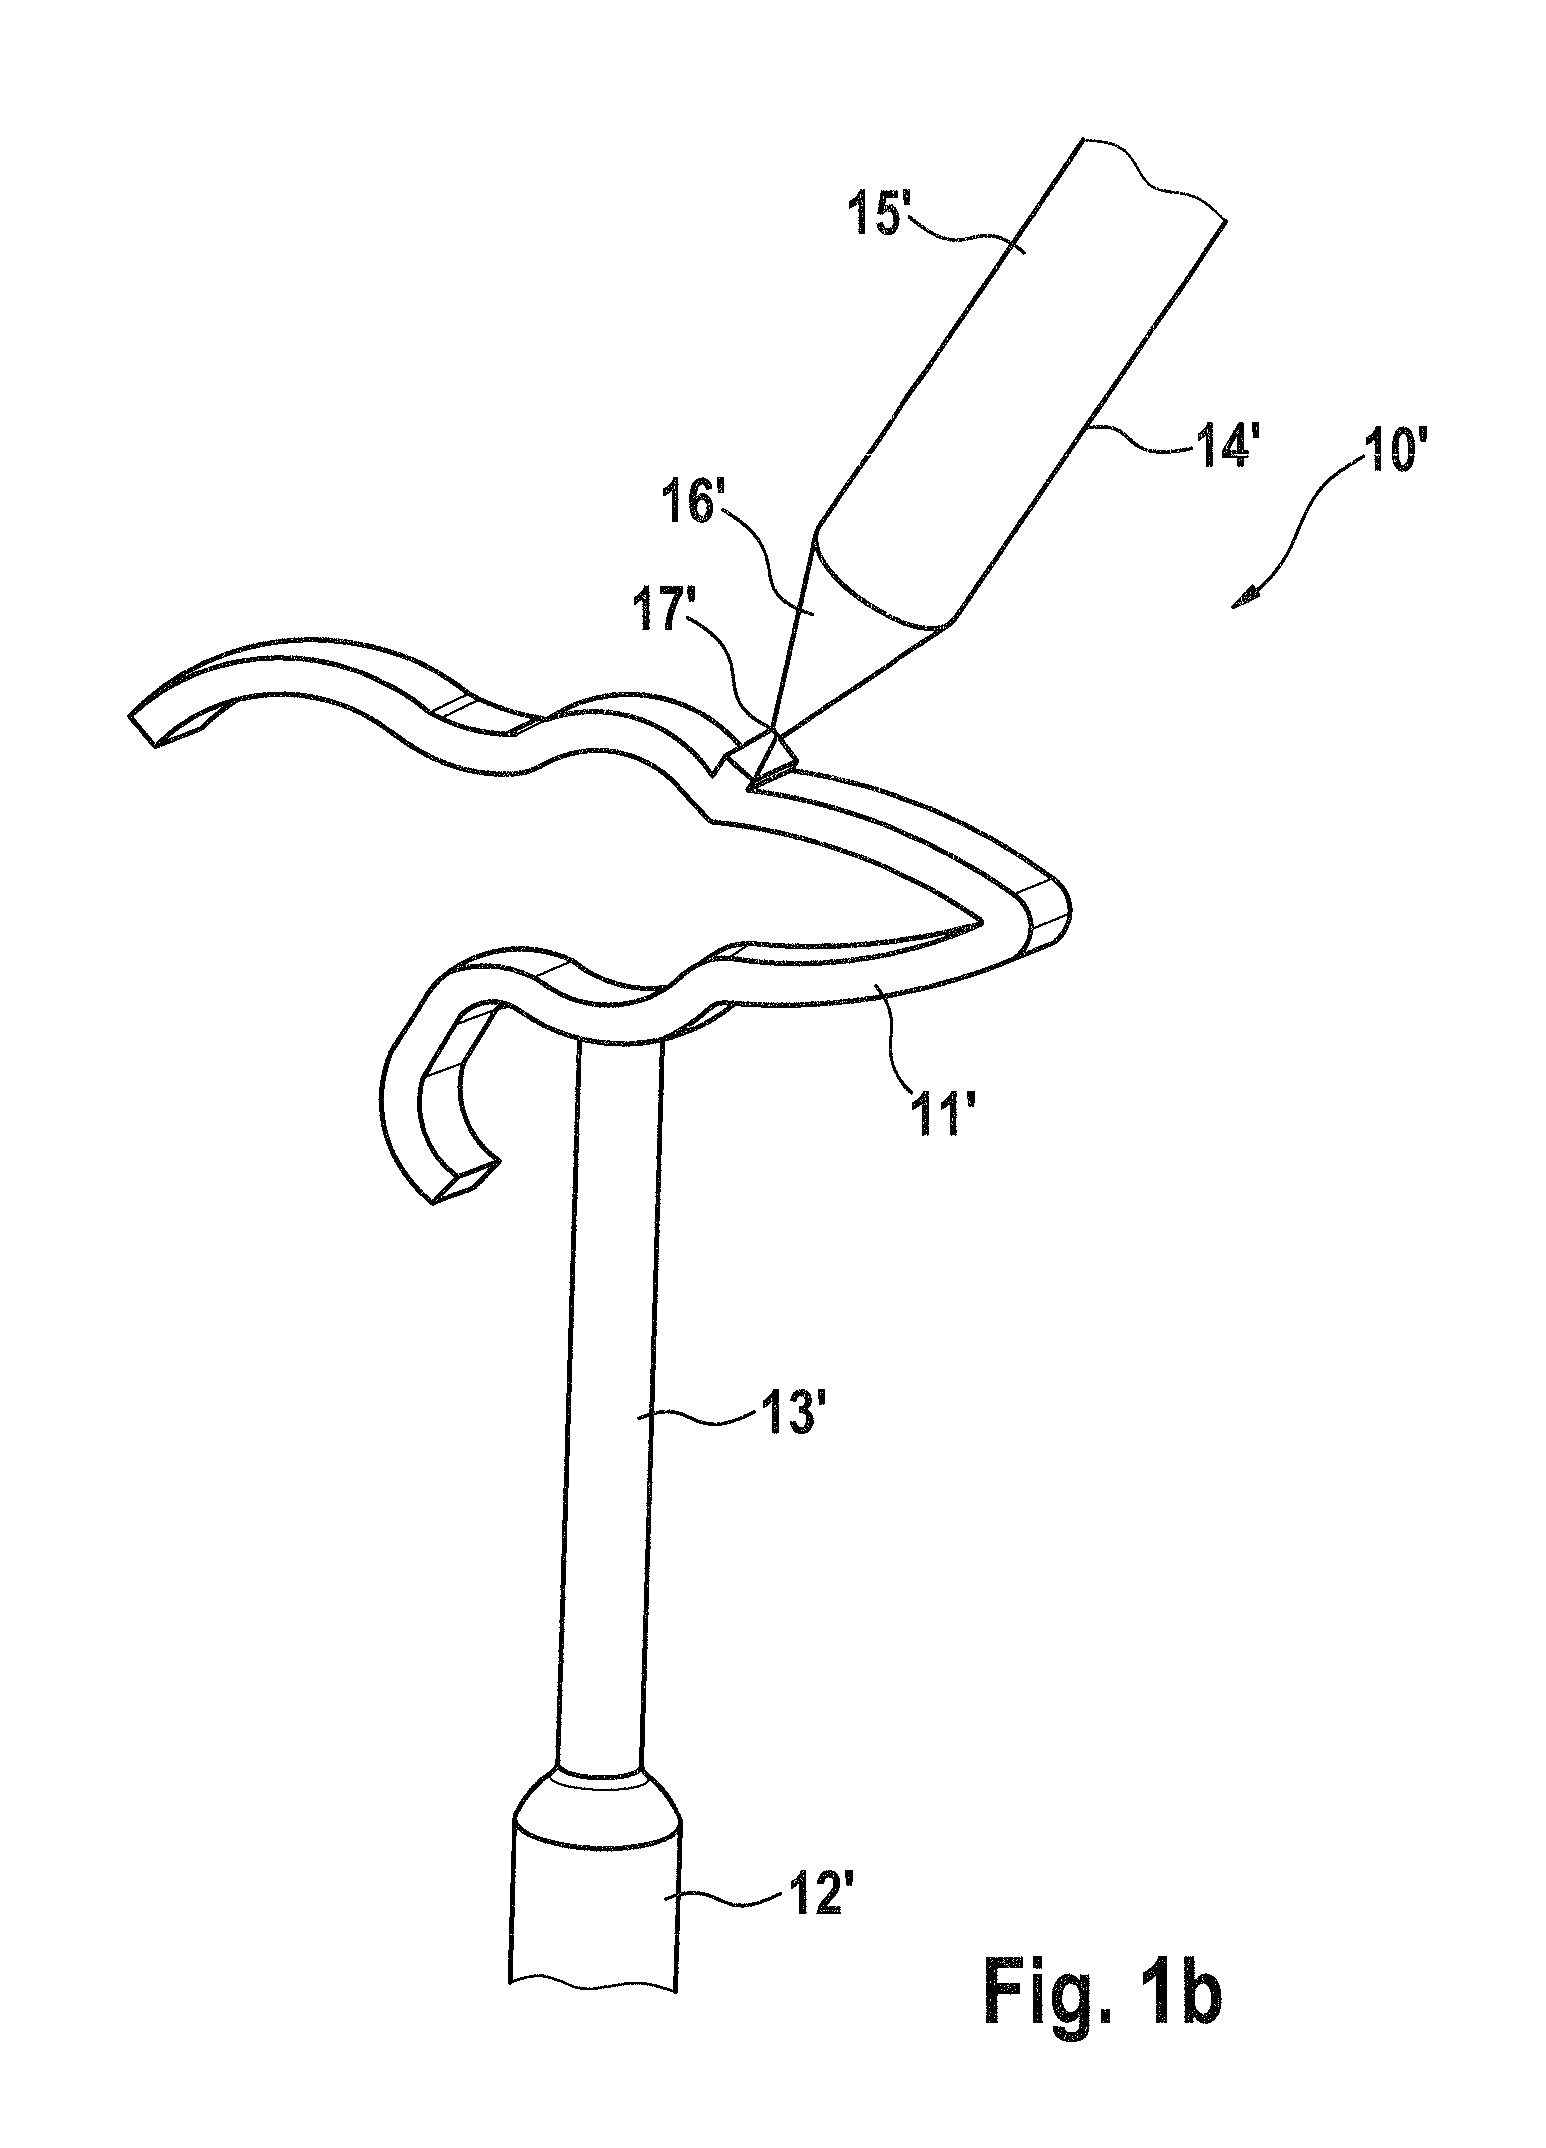 Passive ossicle prosthesis comprising applicator